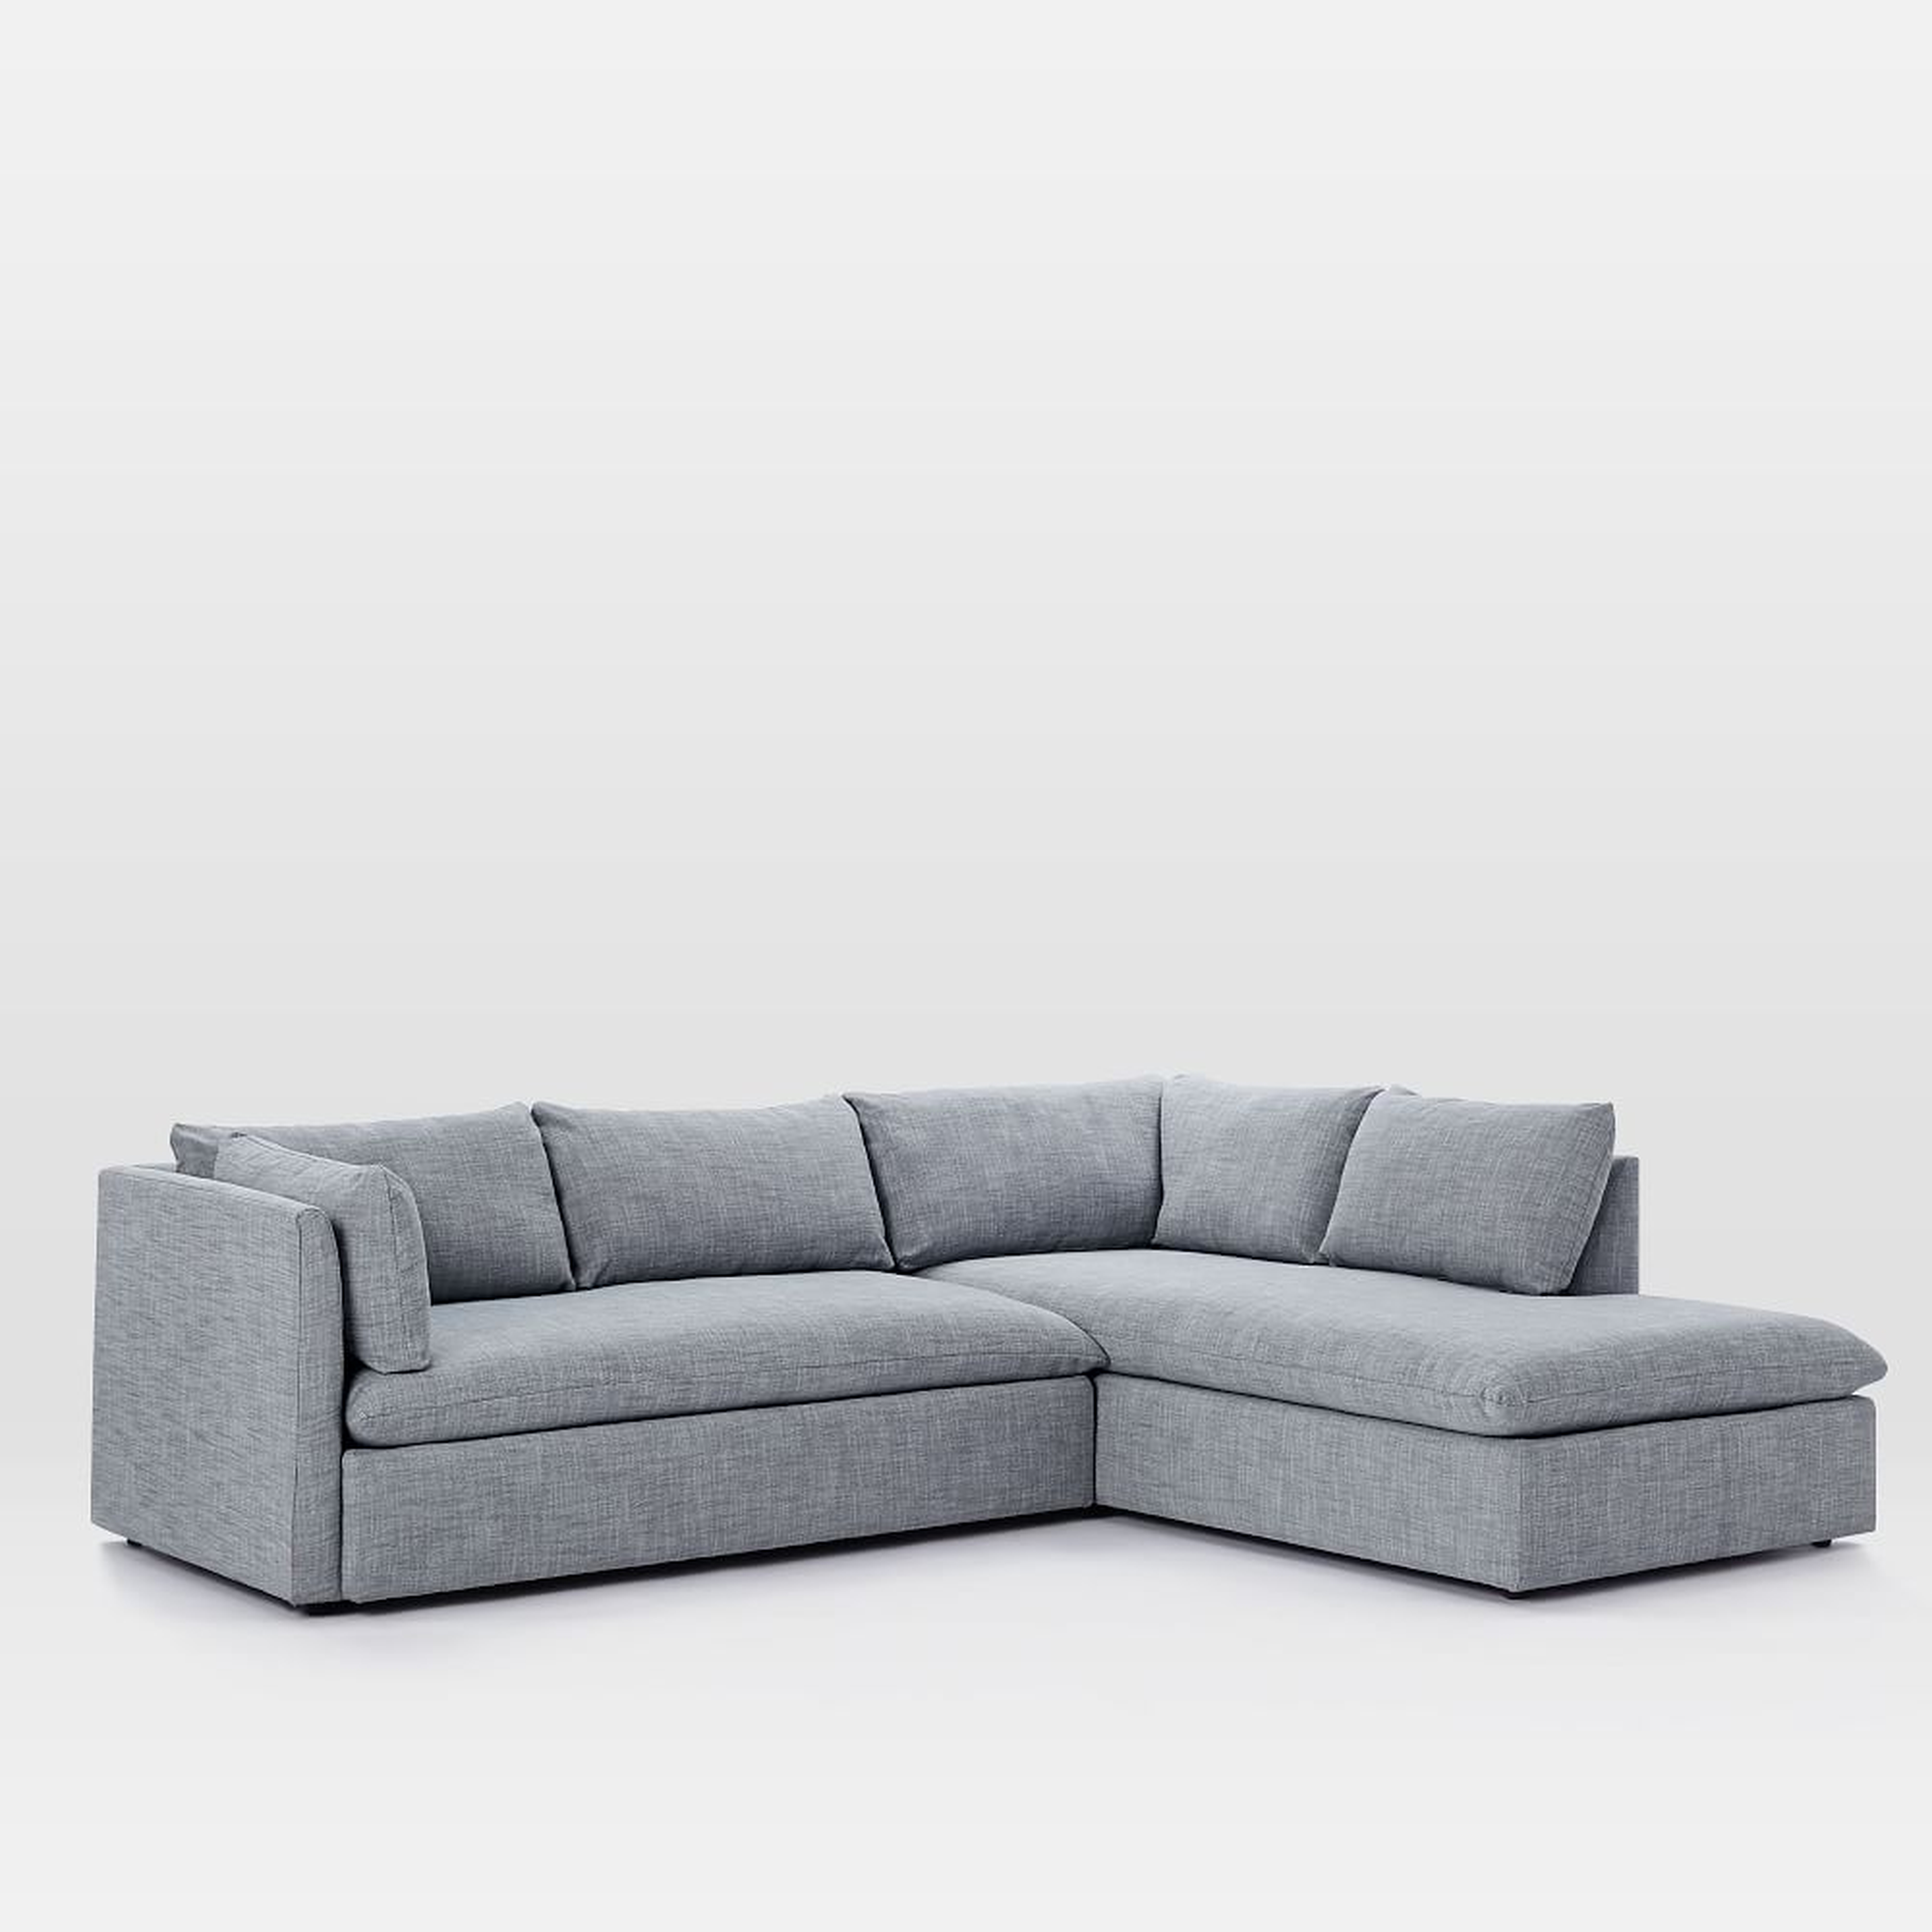 Shelter Sectional Set 01: Left Arm Sofa, Right Arm Terminal Chaise, Poly, Yarn Dyed Linen Weave, Graphite, Concealed Supports - West Elm